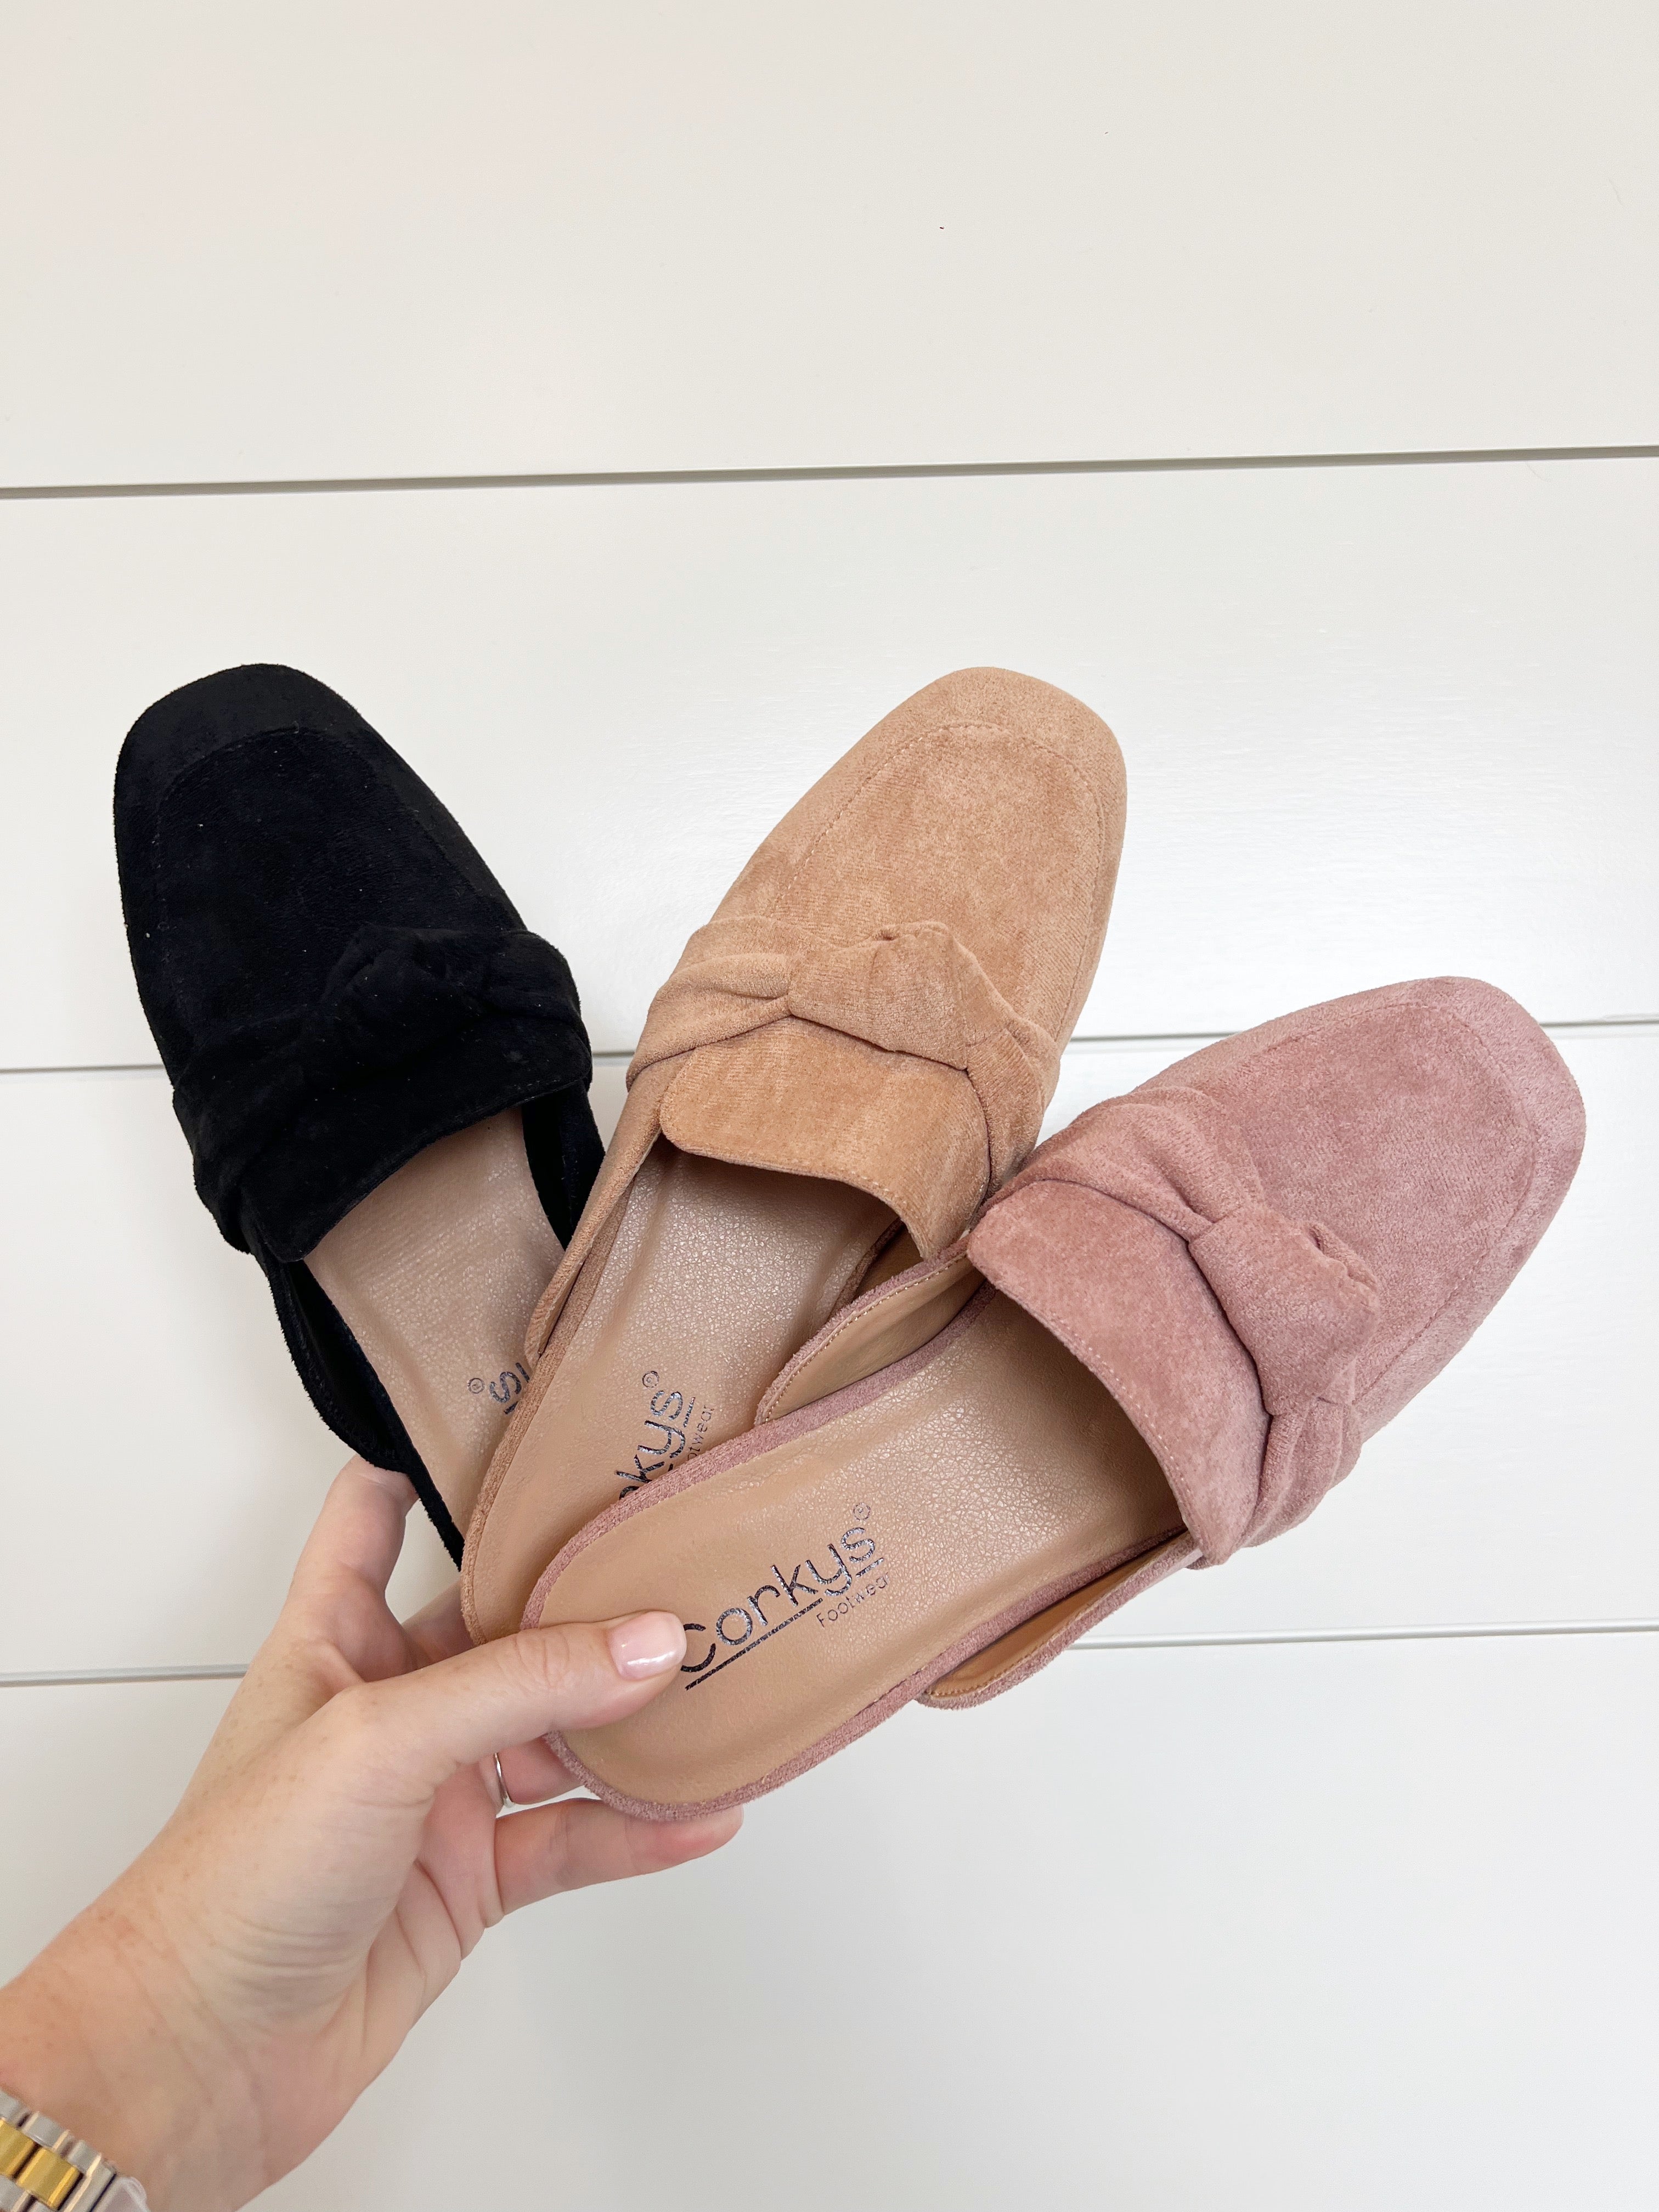 Clingy Slip-On Shoe by Corky’s (Ships Late June)